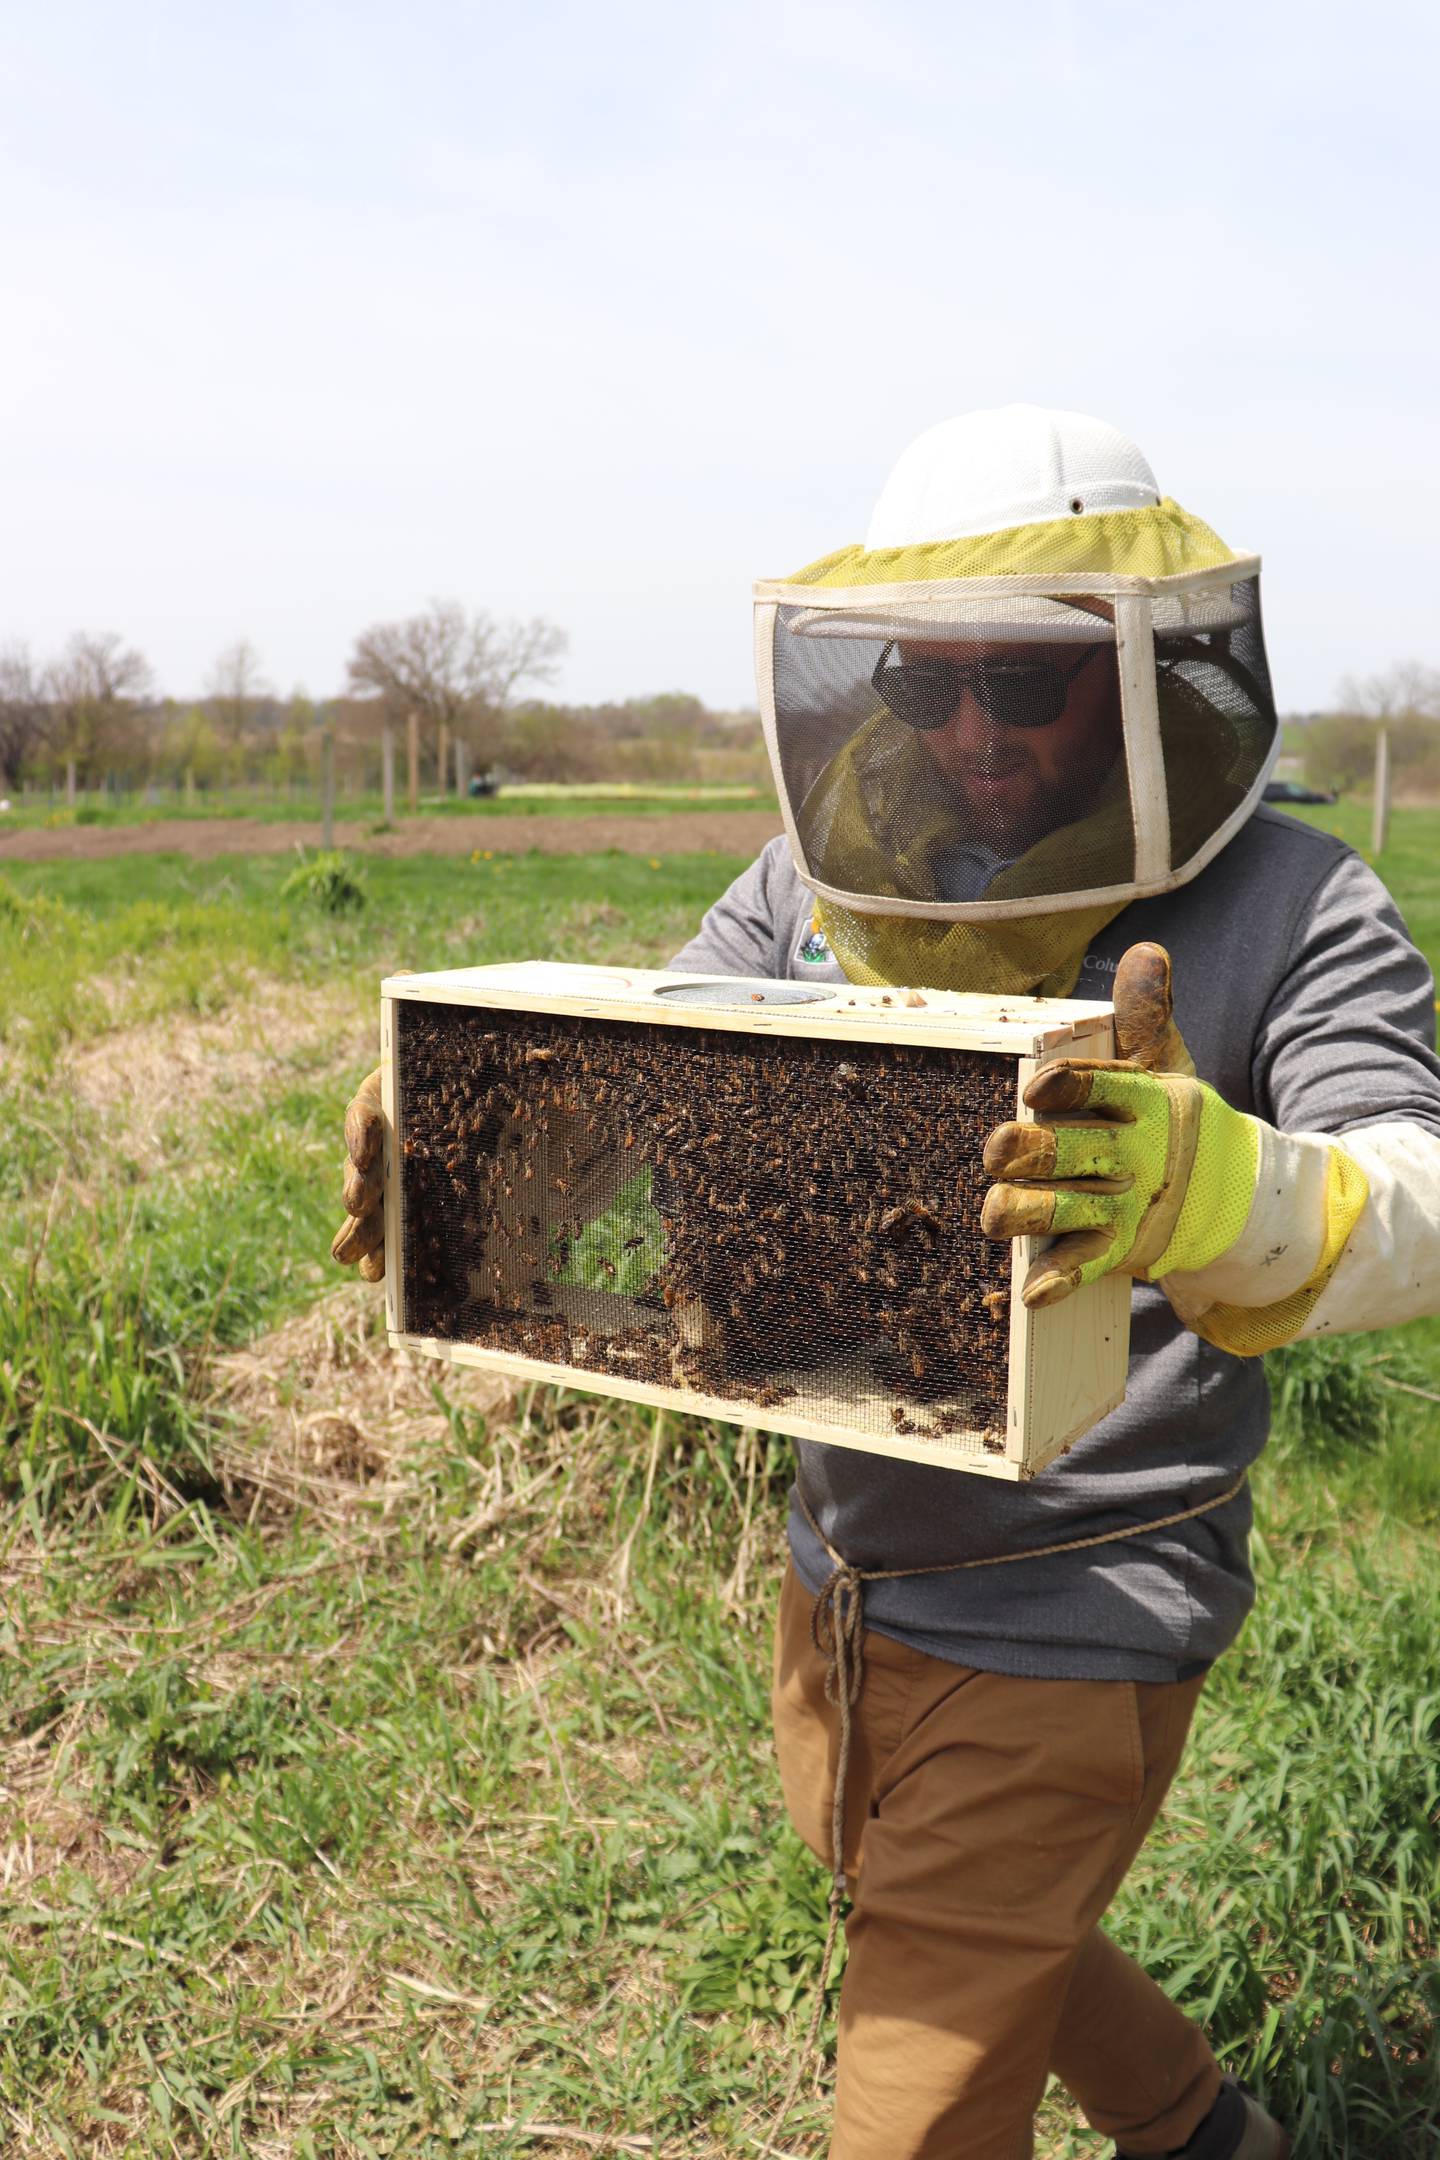 Dagley welcomes the Carniolan Honey Bees to their new enclosed home adjacent to the Community Gardens at Prairie Green, where they will begin their work as pollinators.